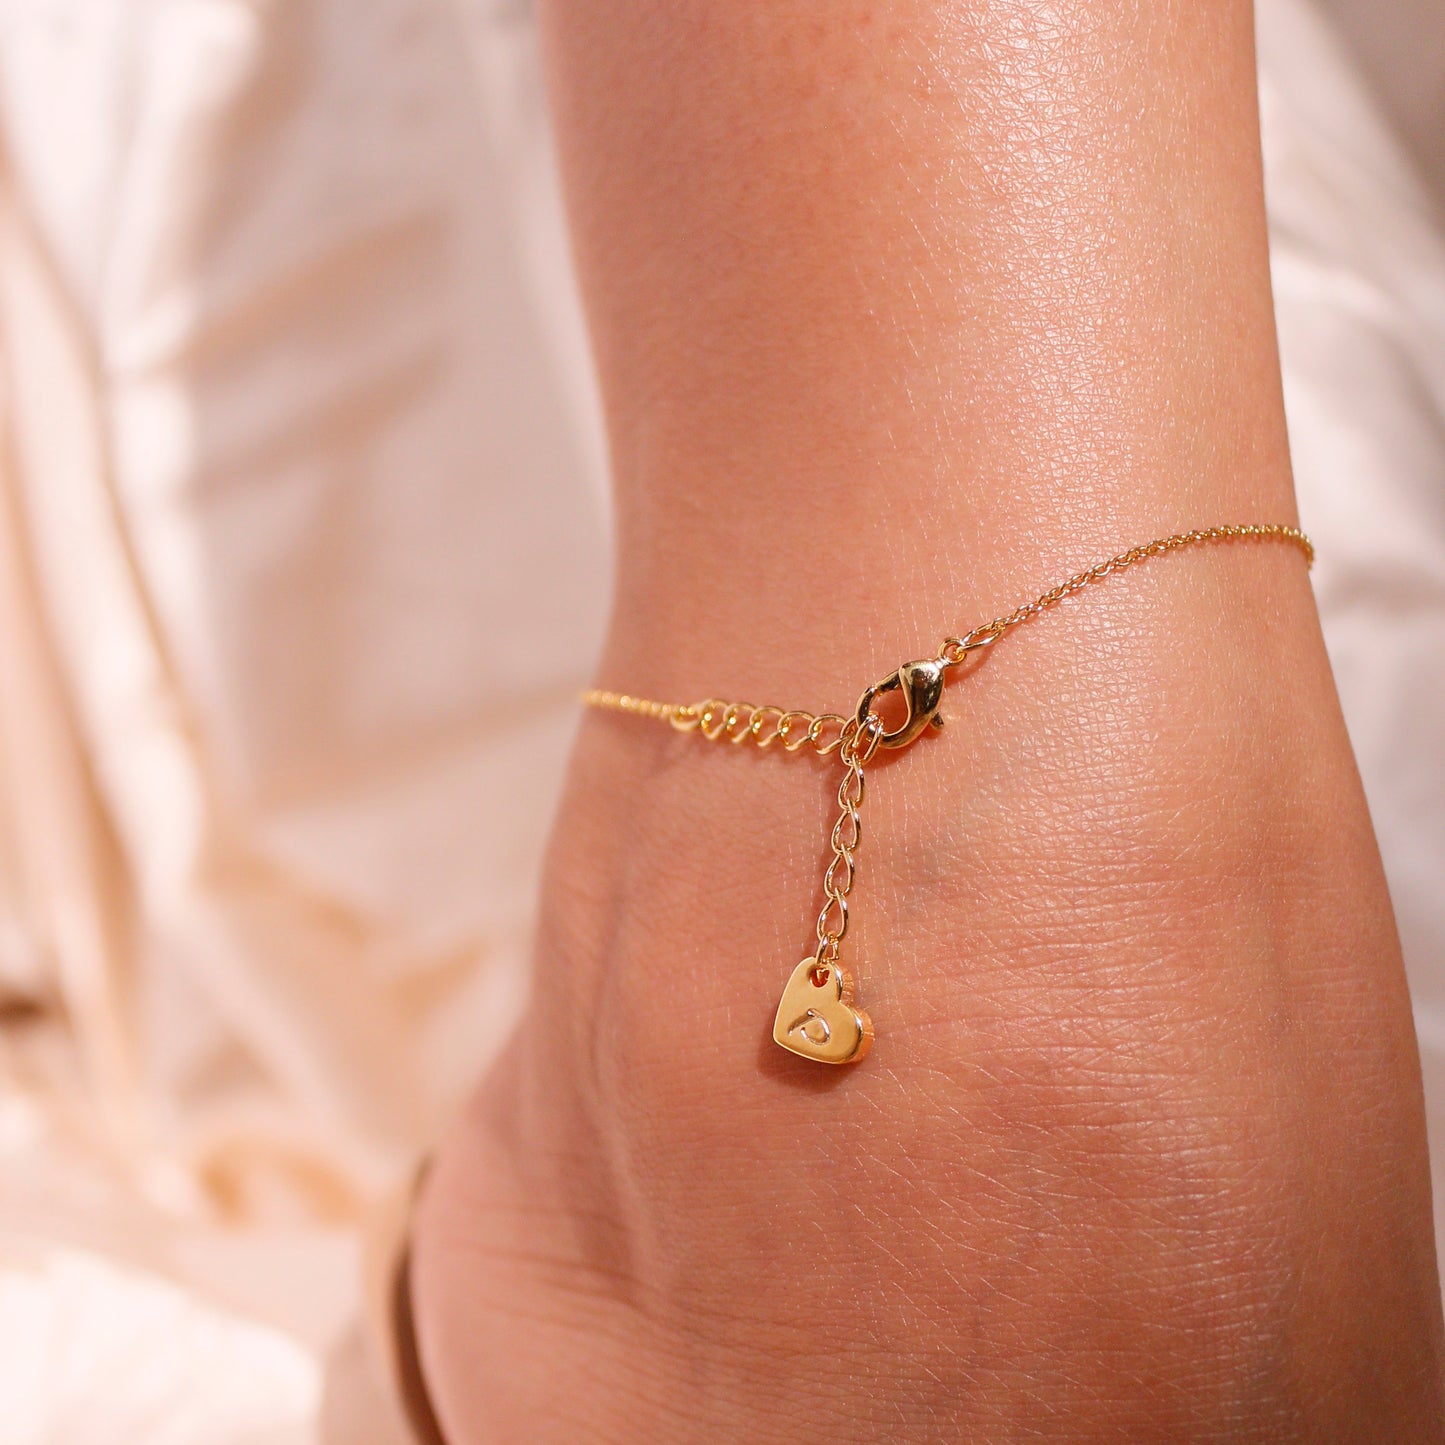 Tiny gold cubic anklet dainty cute anklets best gift for her gold summer anklets